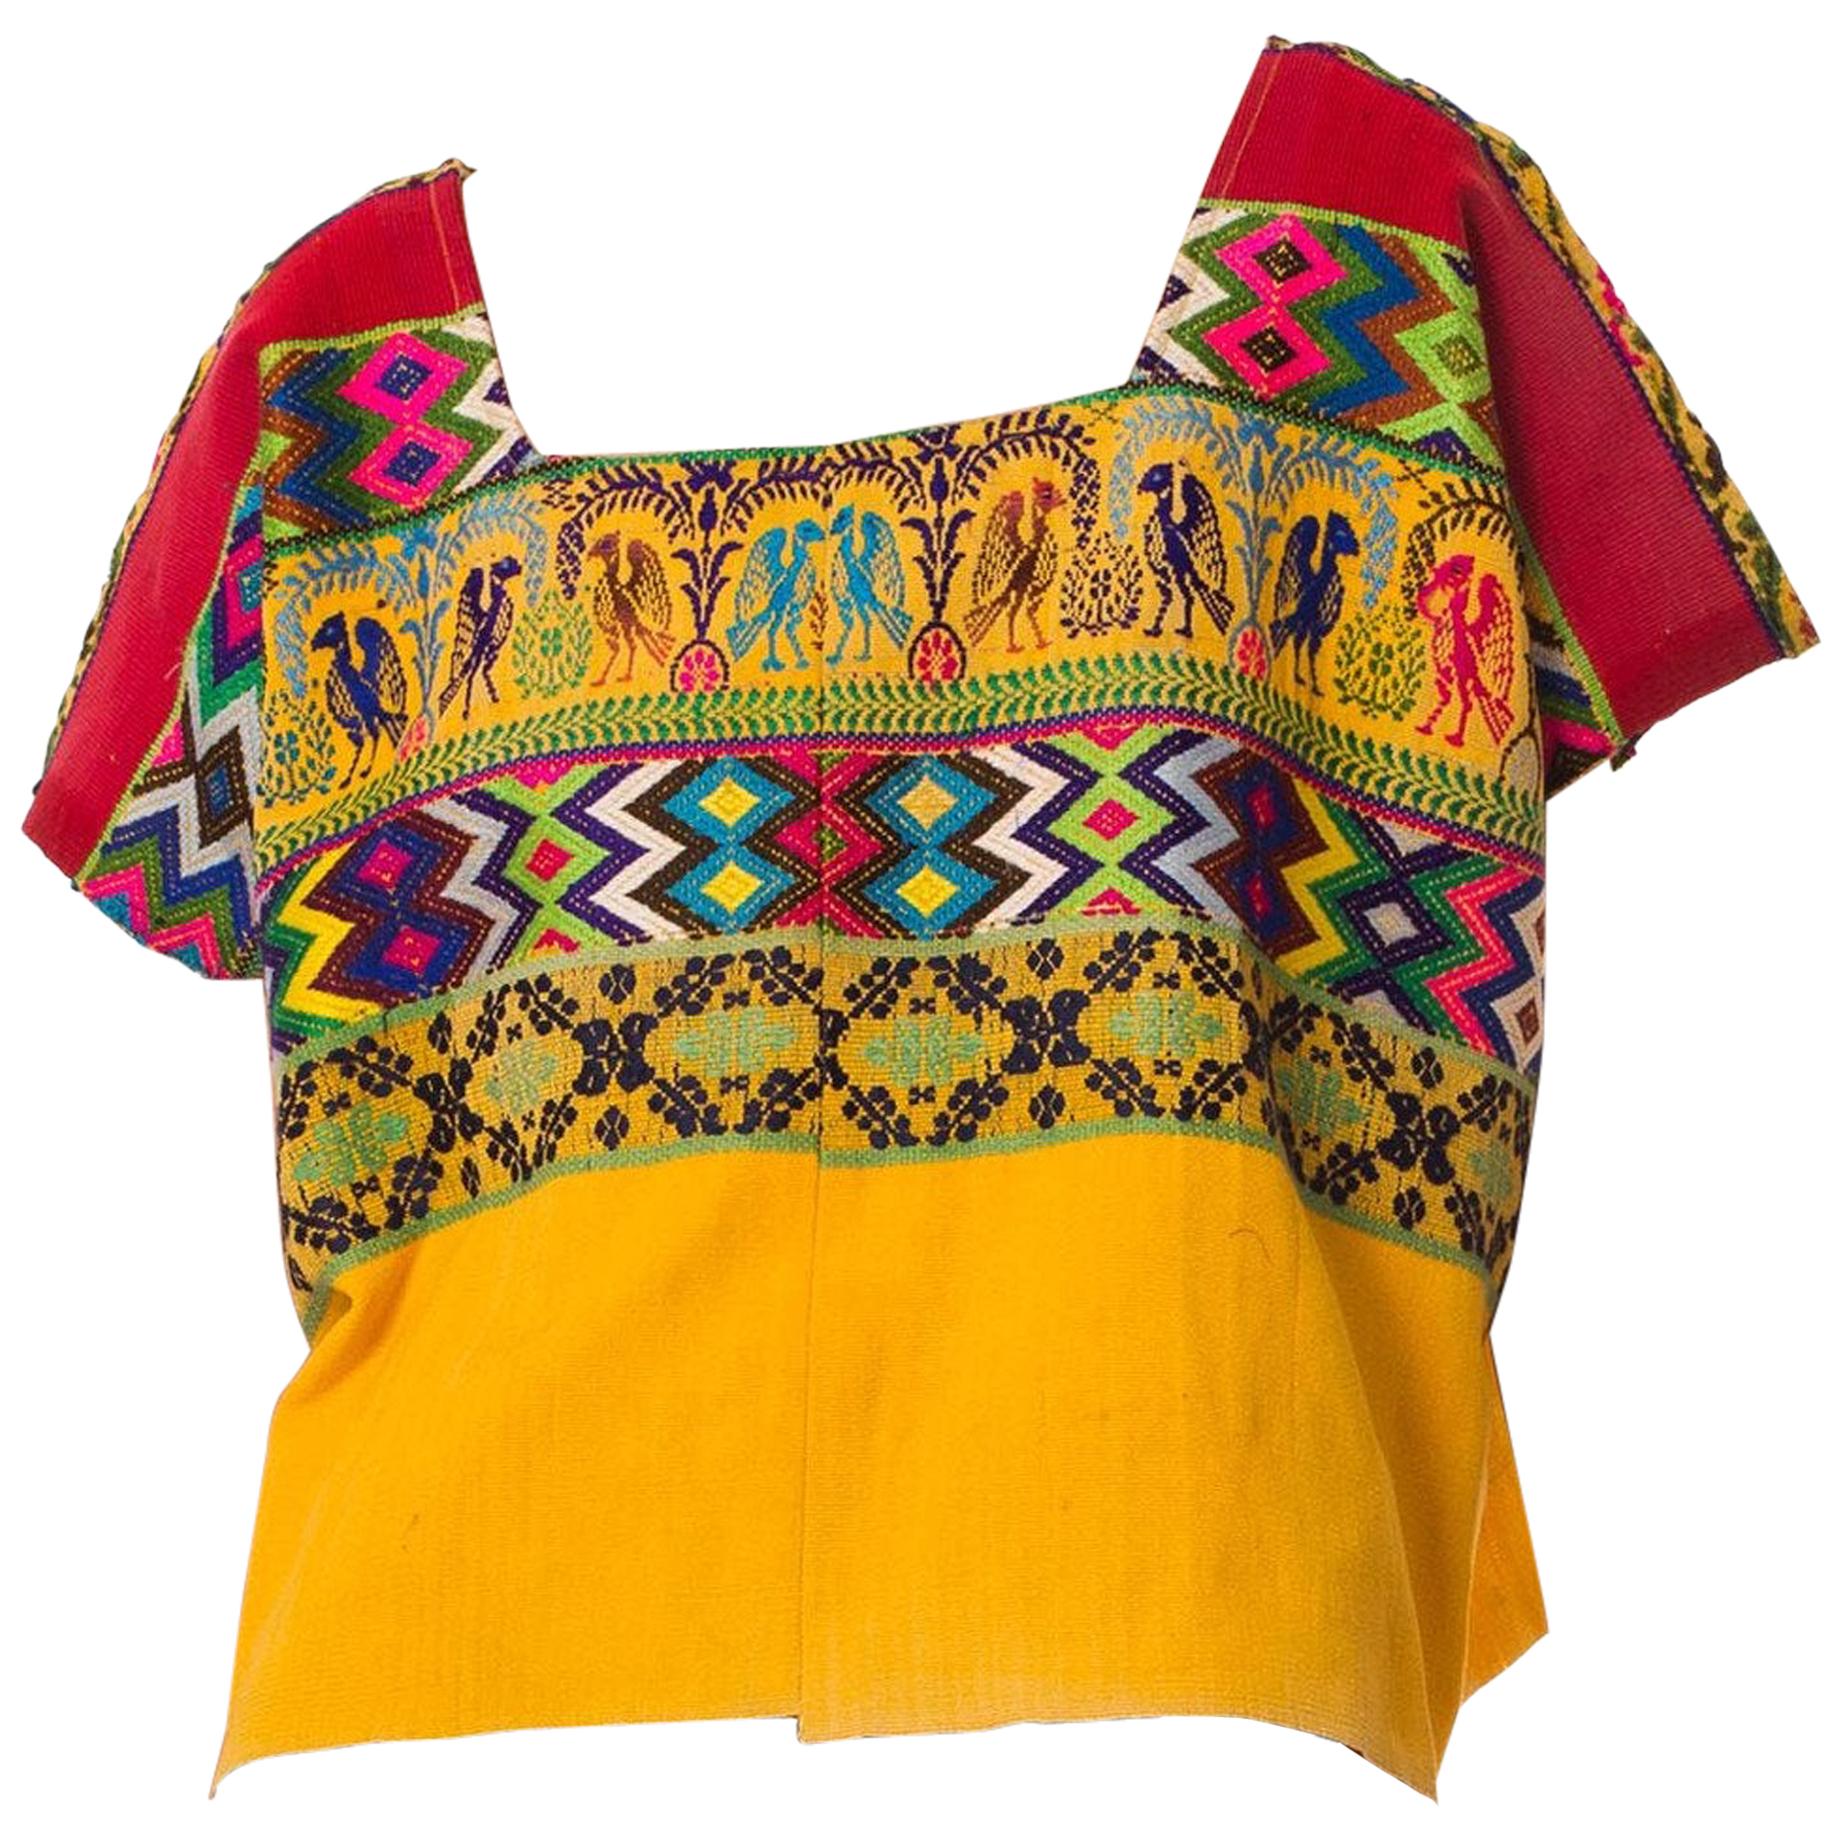 1970S Red & Yellow Cotton Top With Geometric Ethnic Hand Embroidery